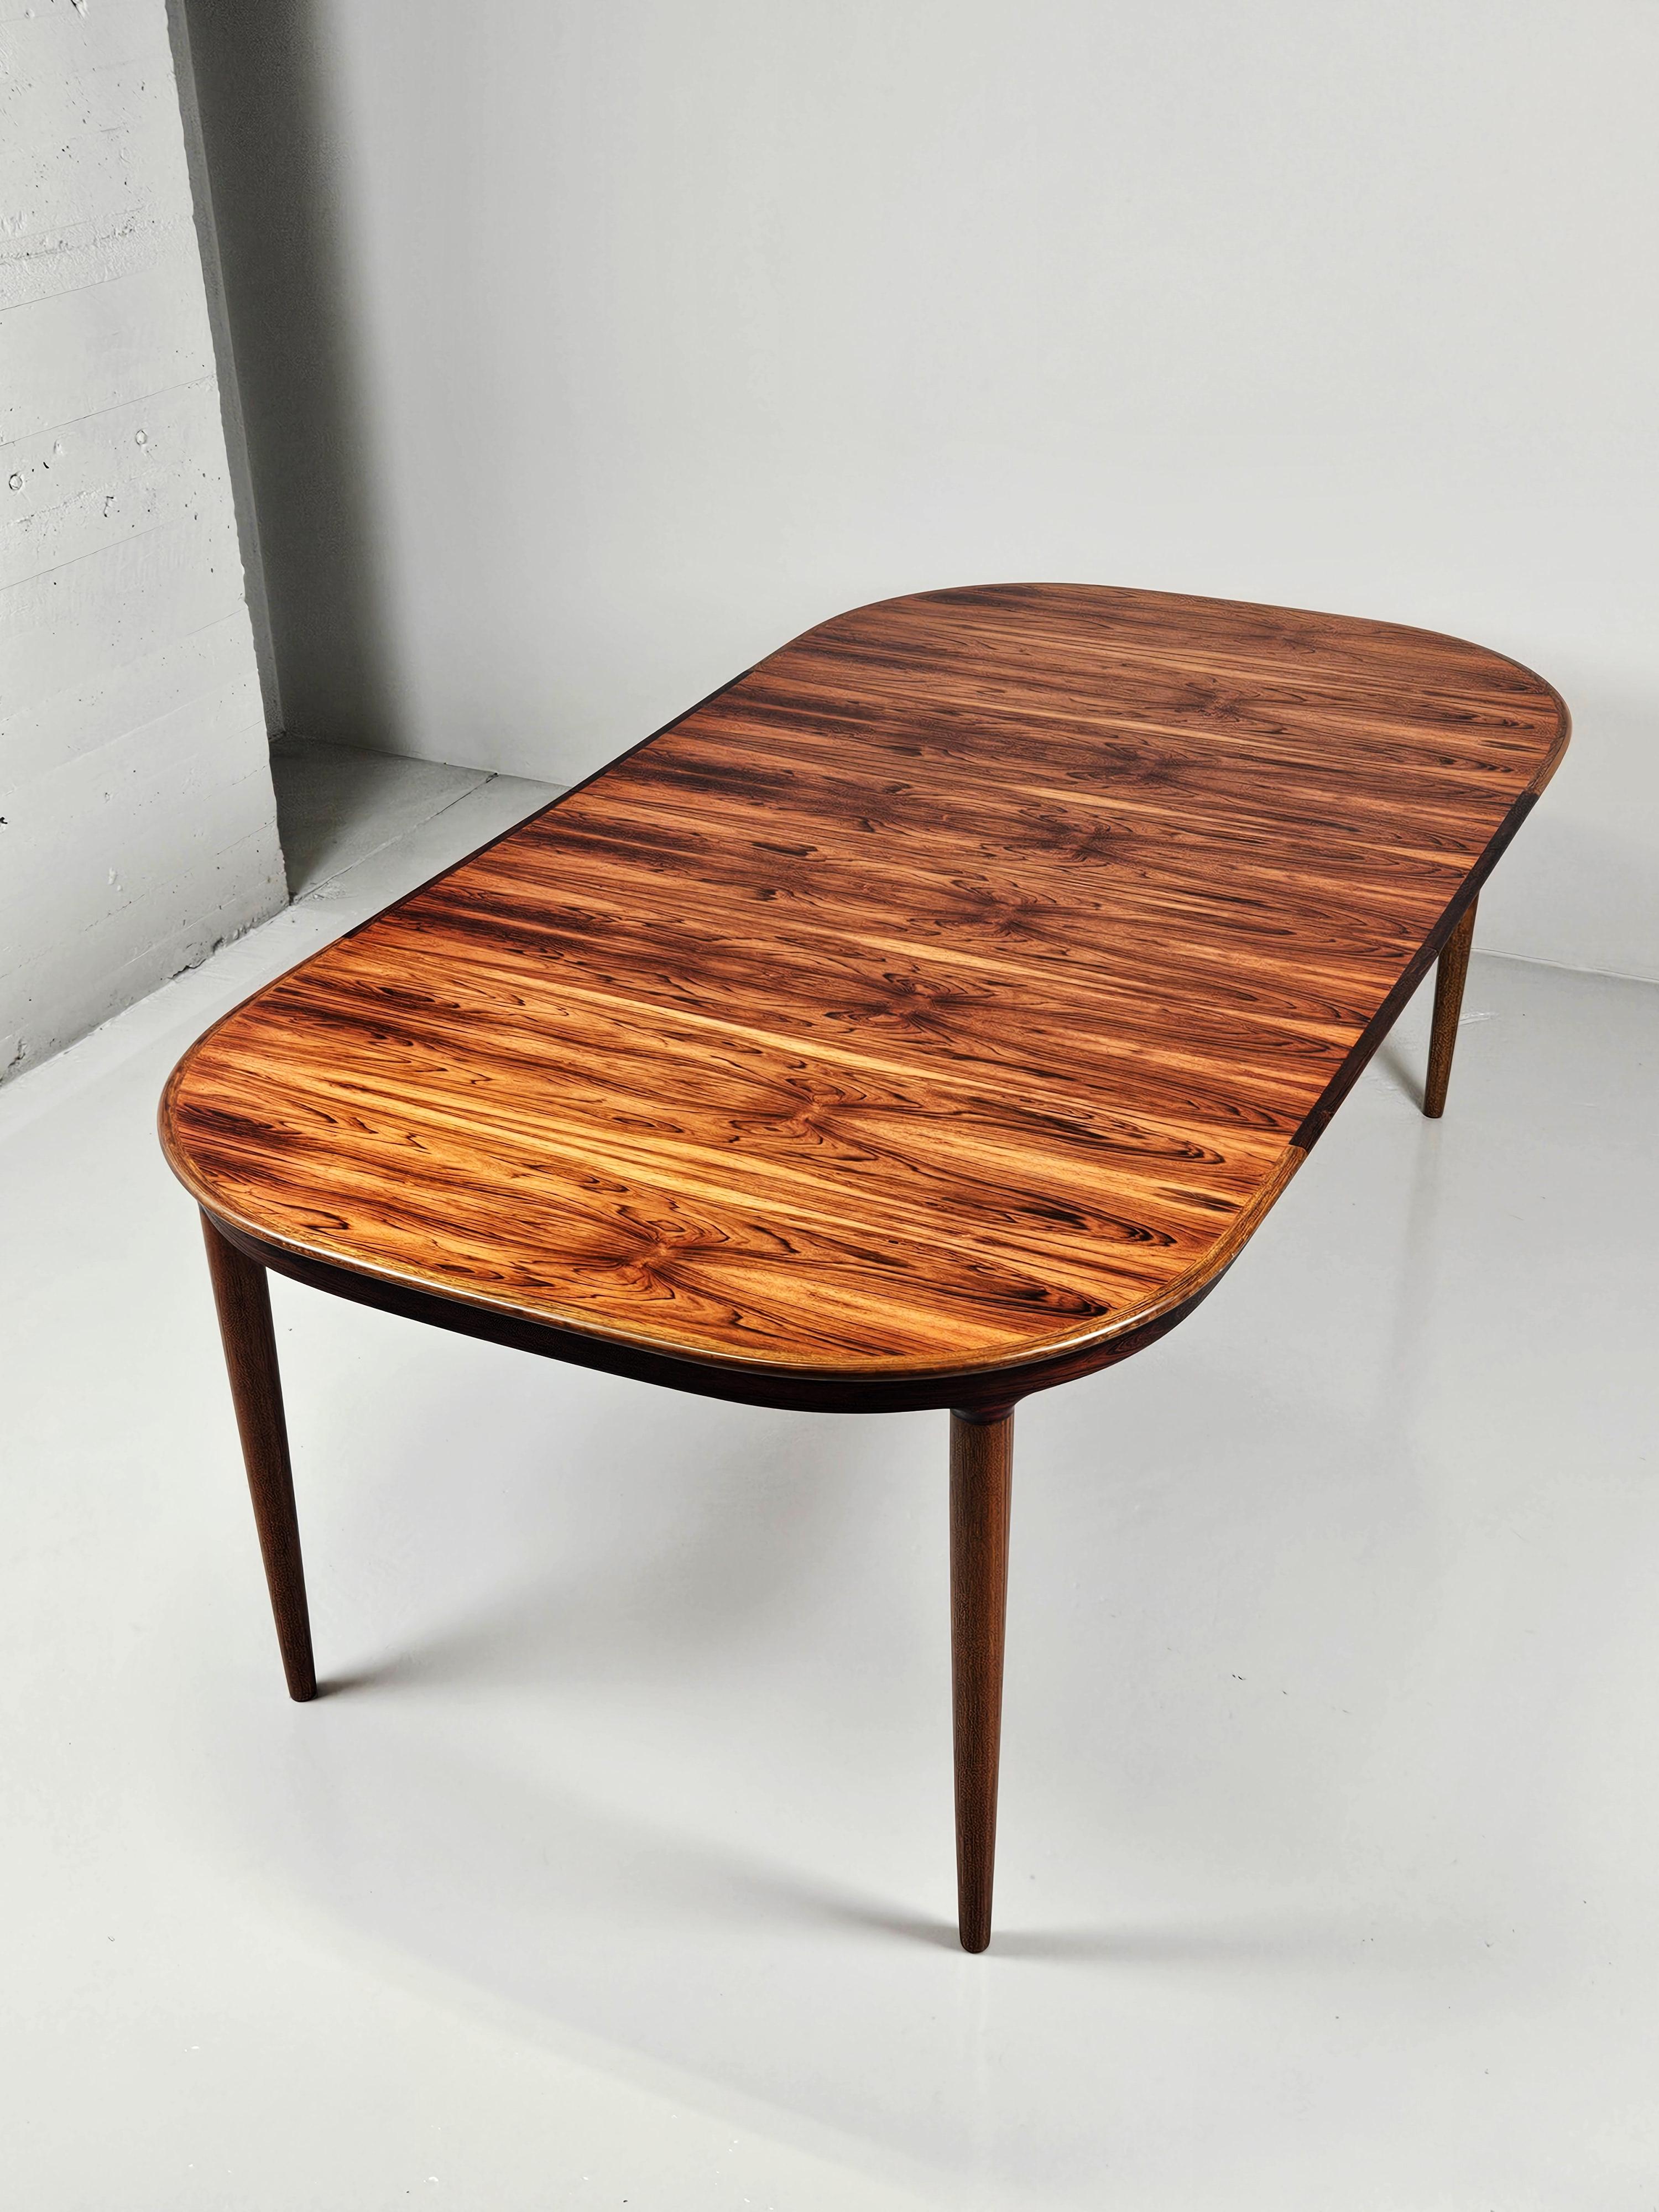 20th Century Scandinavian modern rosewood dining table, 1960s, Denmark For Sale